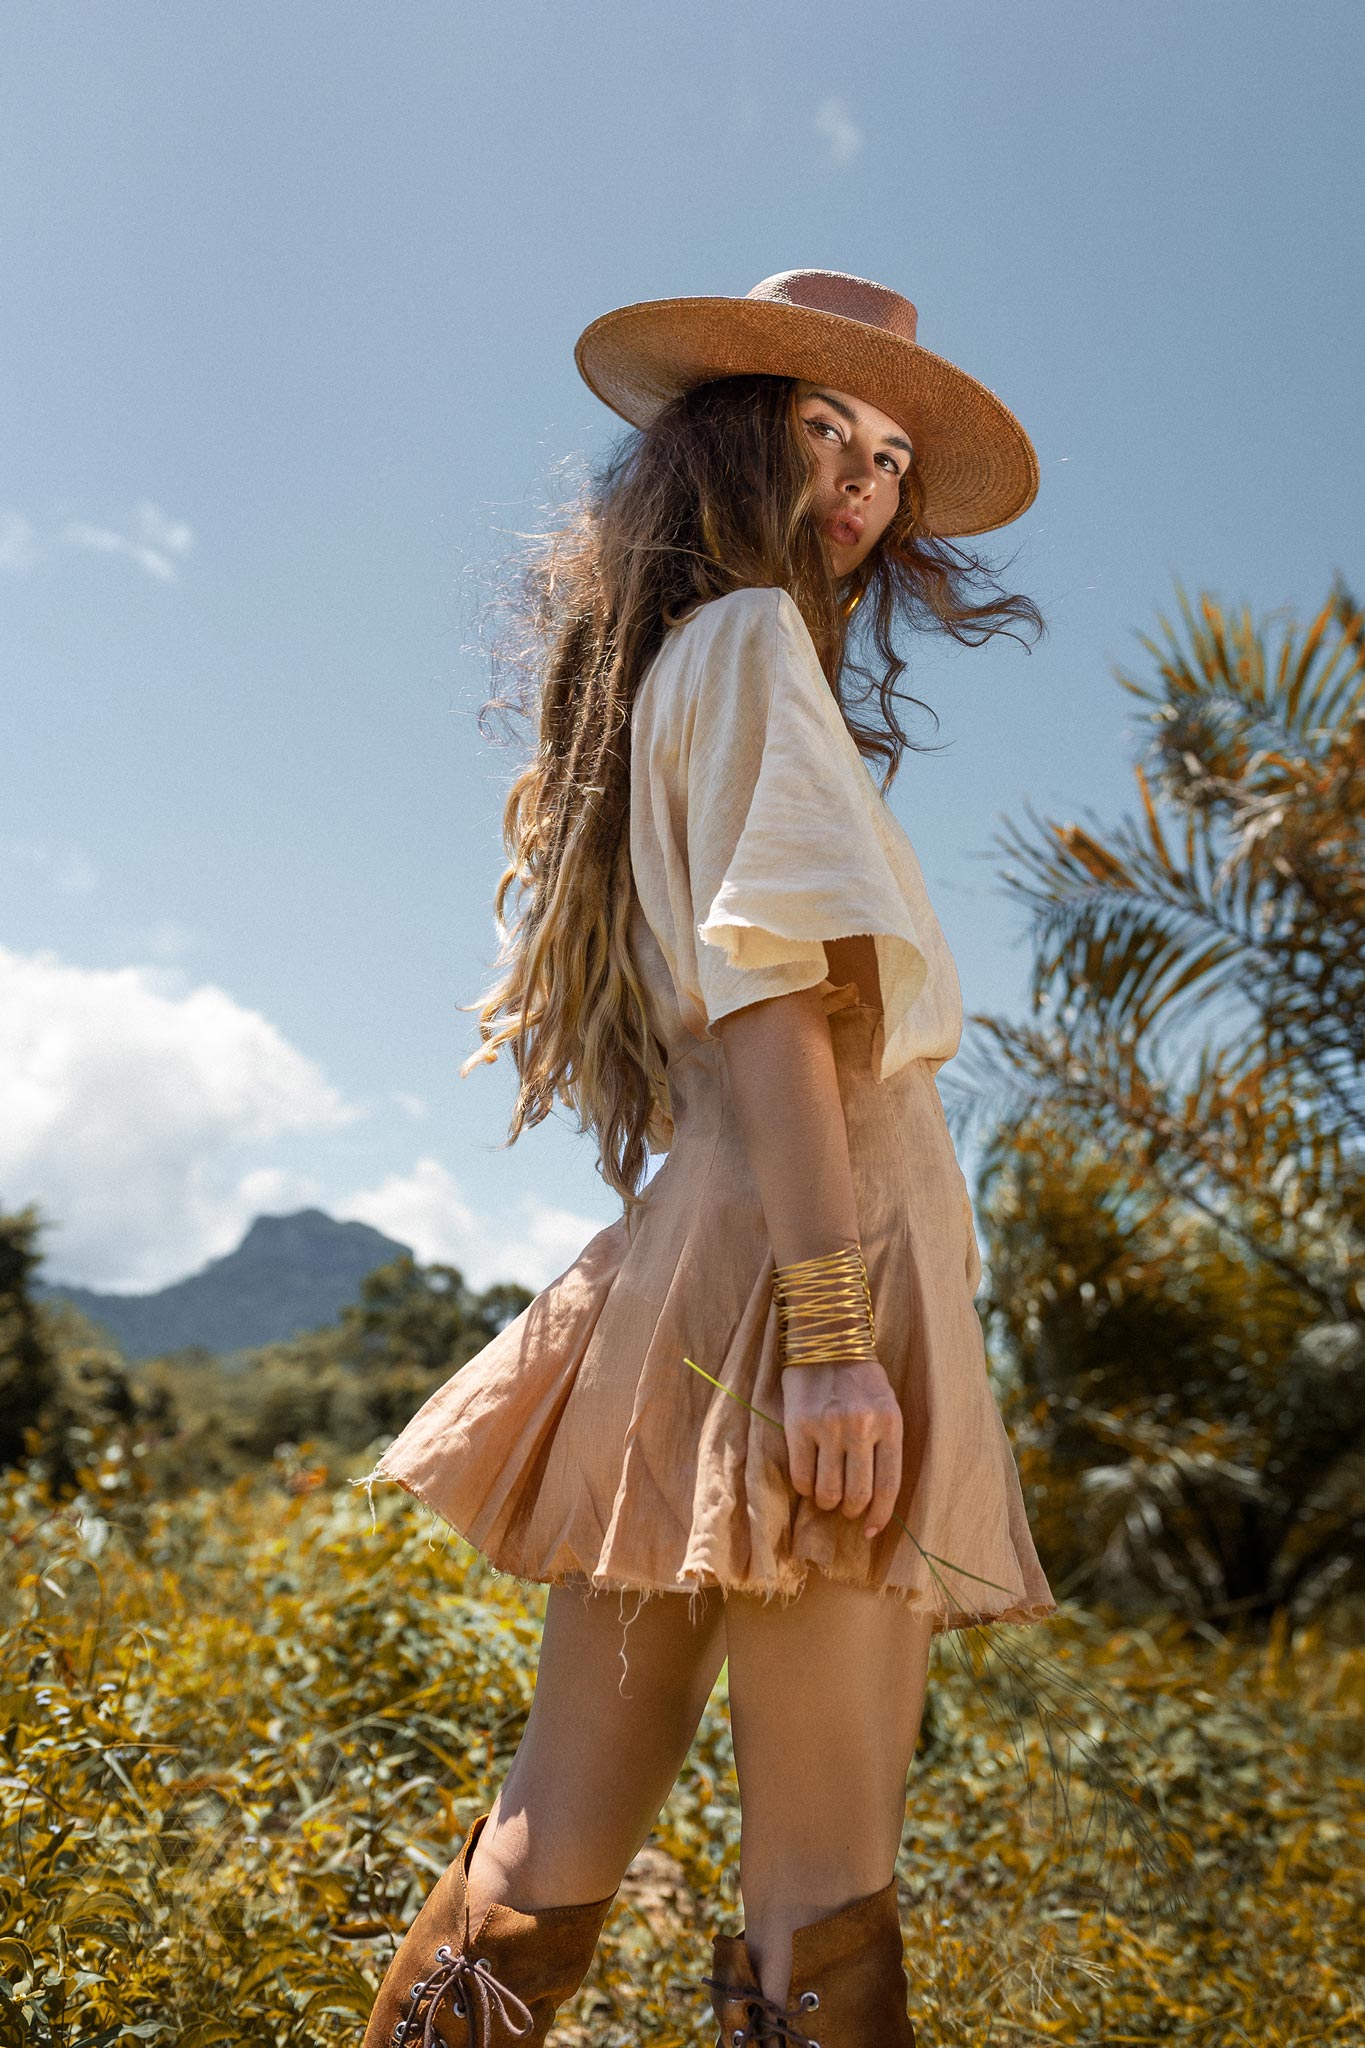 Light Pink to Beige Pink Ombre Boho Dress: Add a touch of bohemian charm to your wardrobe with our light pink to beige pink ombre dress. Handcrafted from organic linen and dyed using eco-conscious methods, this dress offers effortless style with a conscience.